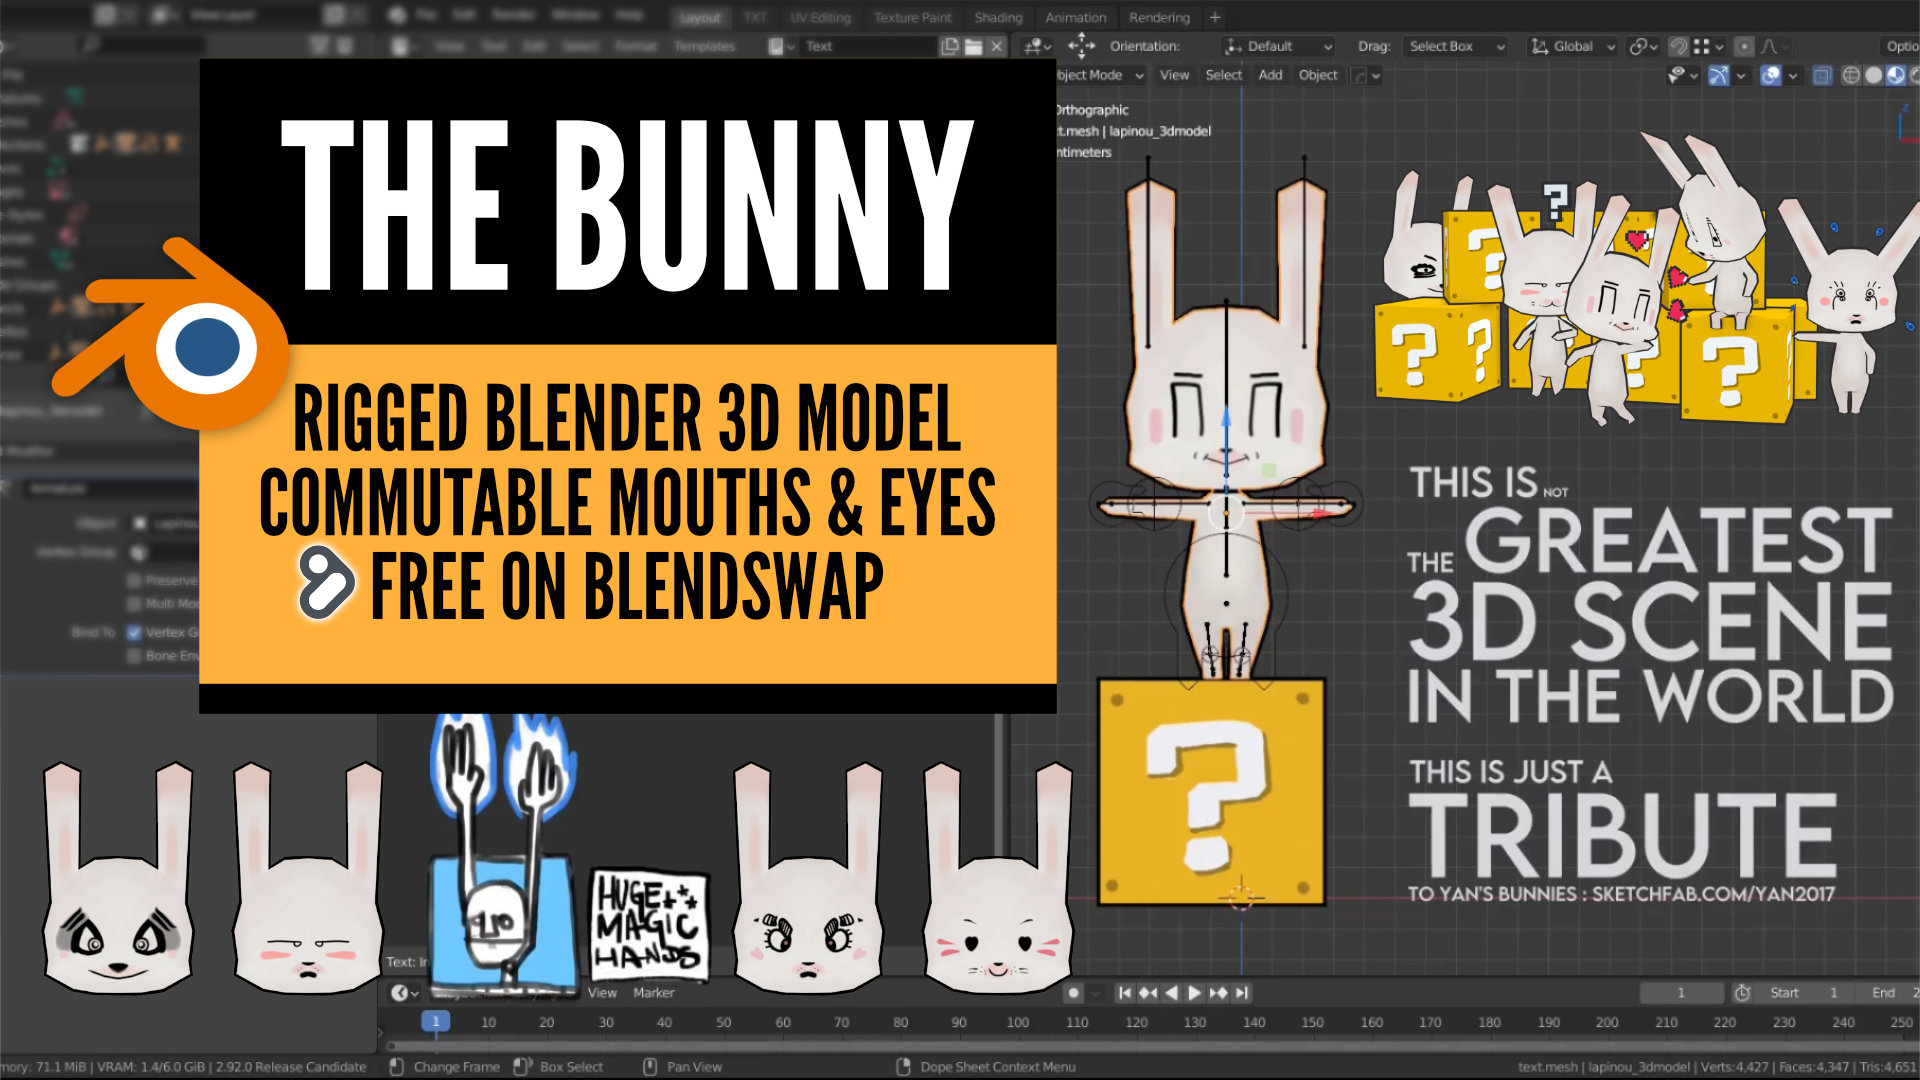 The Bunny - FREE RIGGED BLENDER 3D MODEL, W/ COMMUTABLE MOUTHS & EYES preview image 1